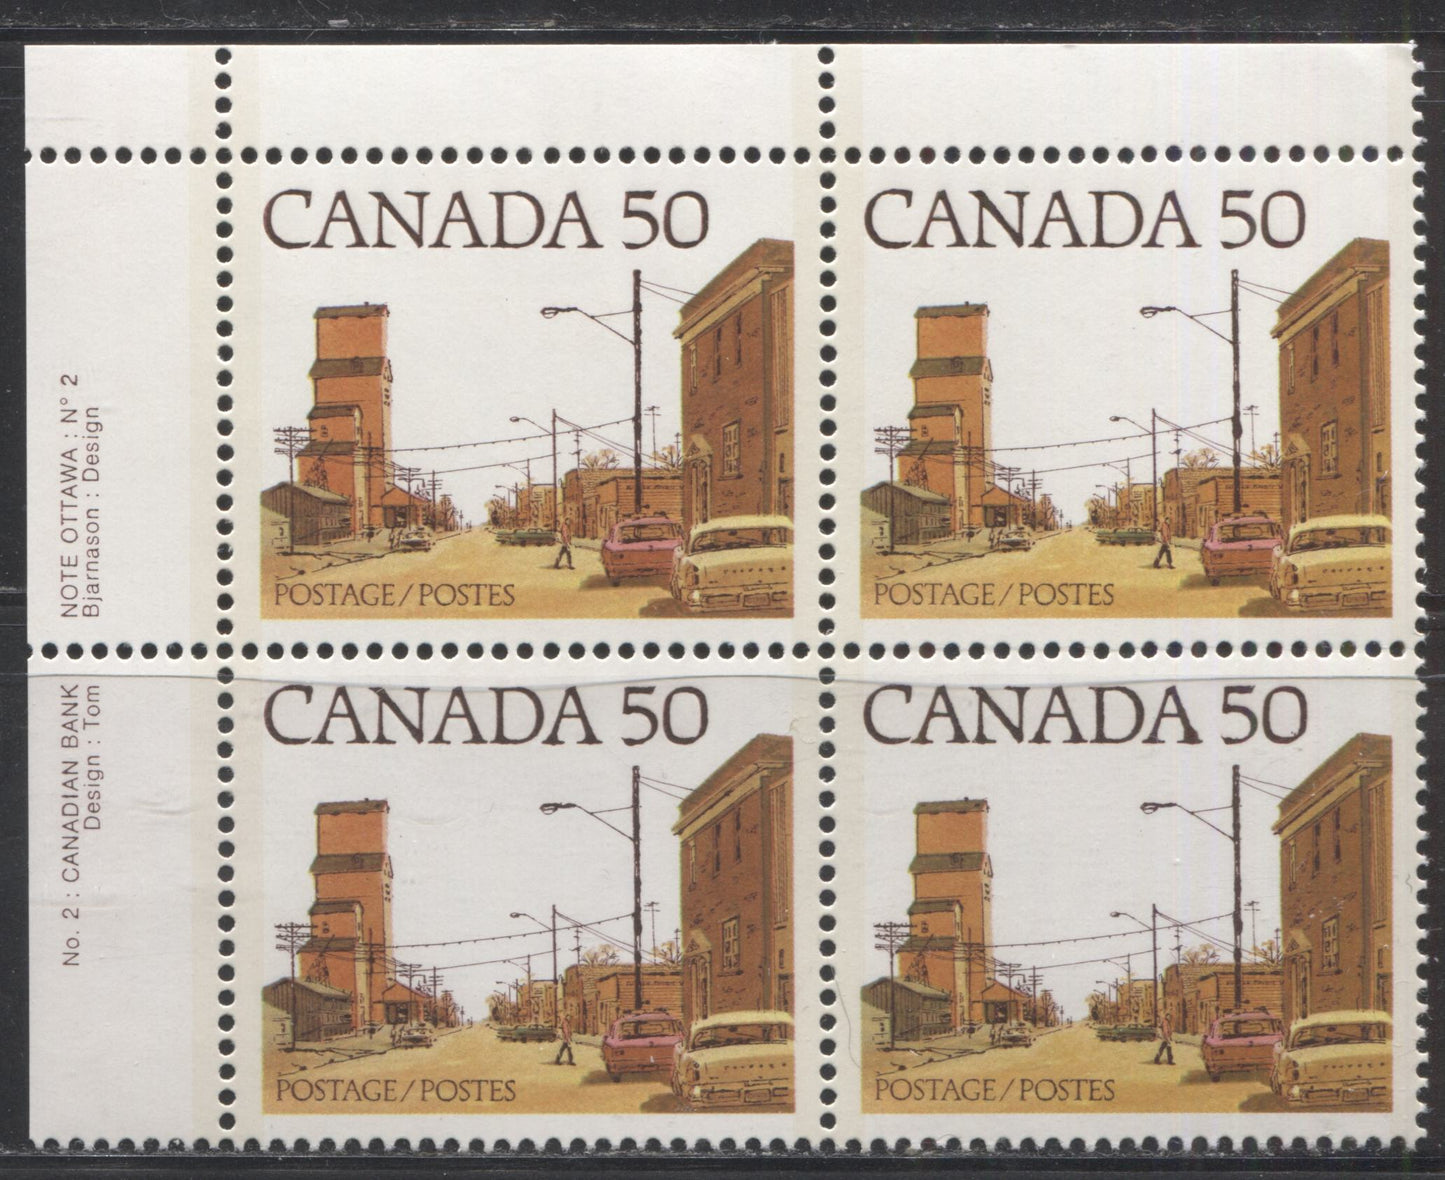 Canada #723Aiii 50c Multicoloured Prairie Street Scene, 1977-1982 Floral & Environment Issue, a VFNH UL Plate 2 Block of the DF/LF-fl Paper, Showing the "Dented Bumper" Variety on Positions 6 and 7, Brown Building at Right